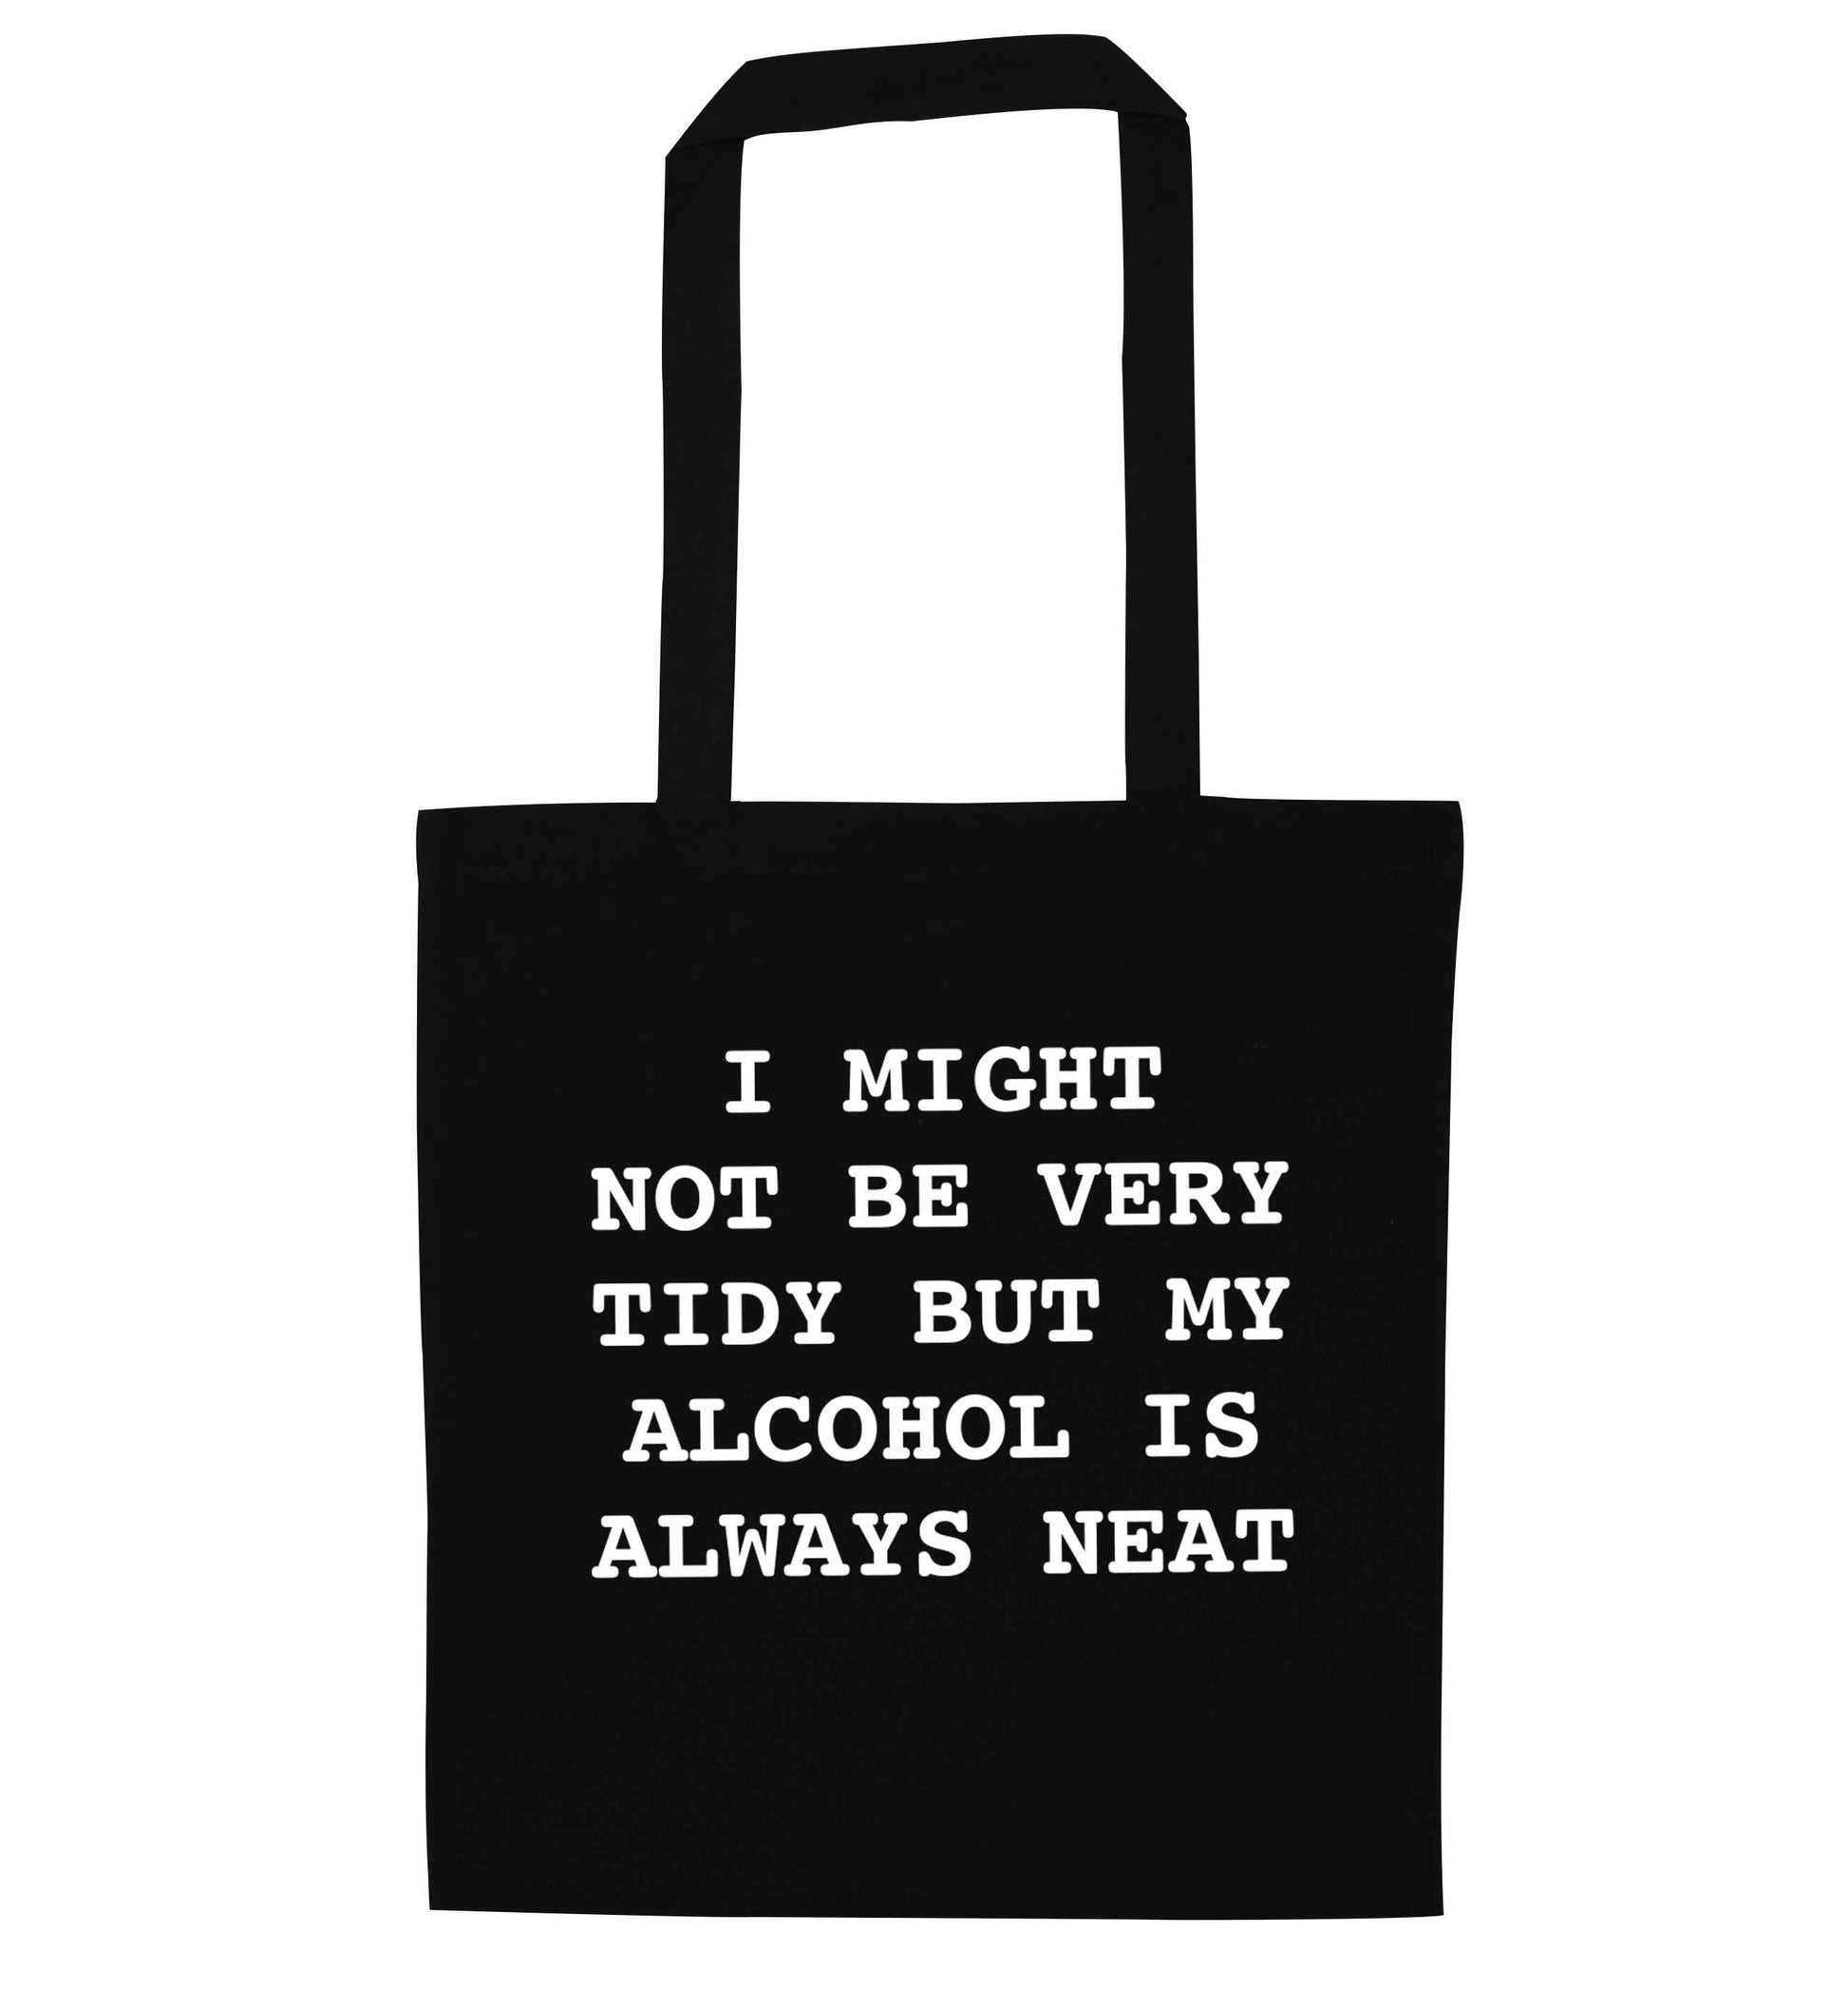 I might not be tidy but my alcohol is always neat black tote bag